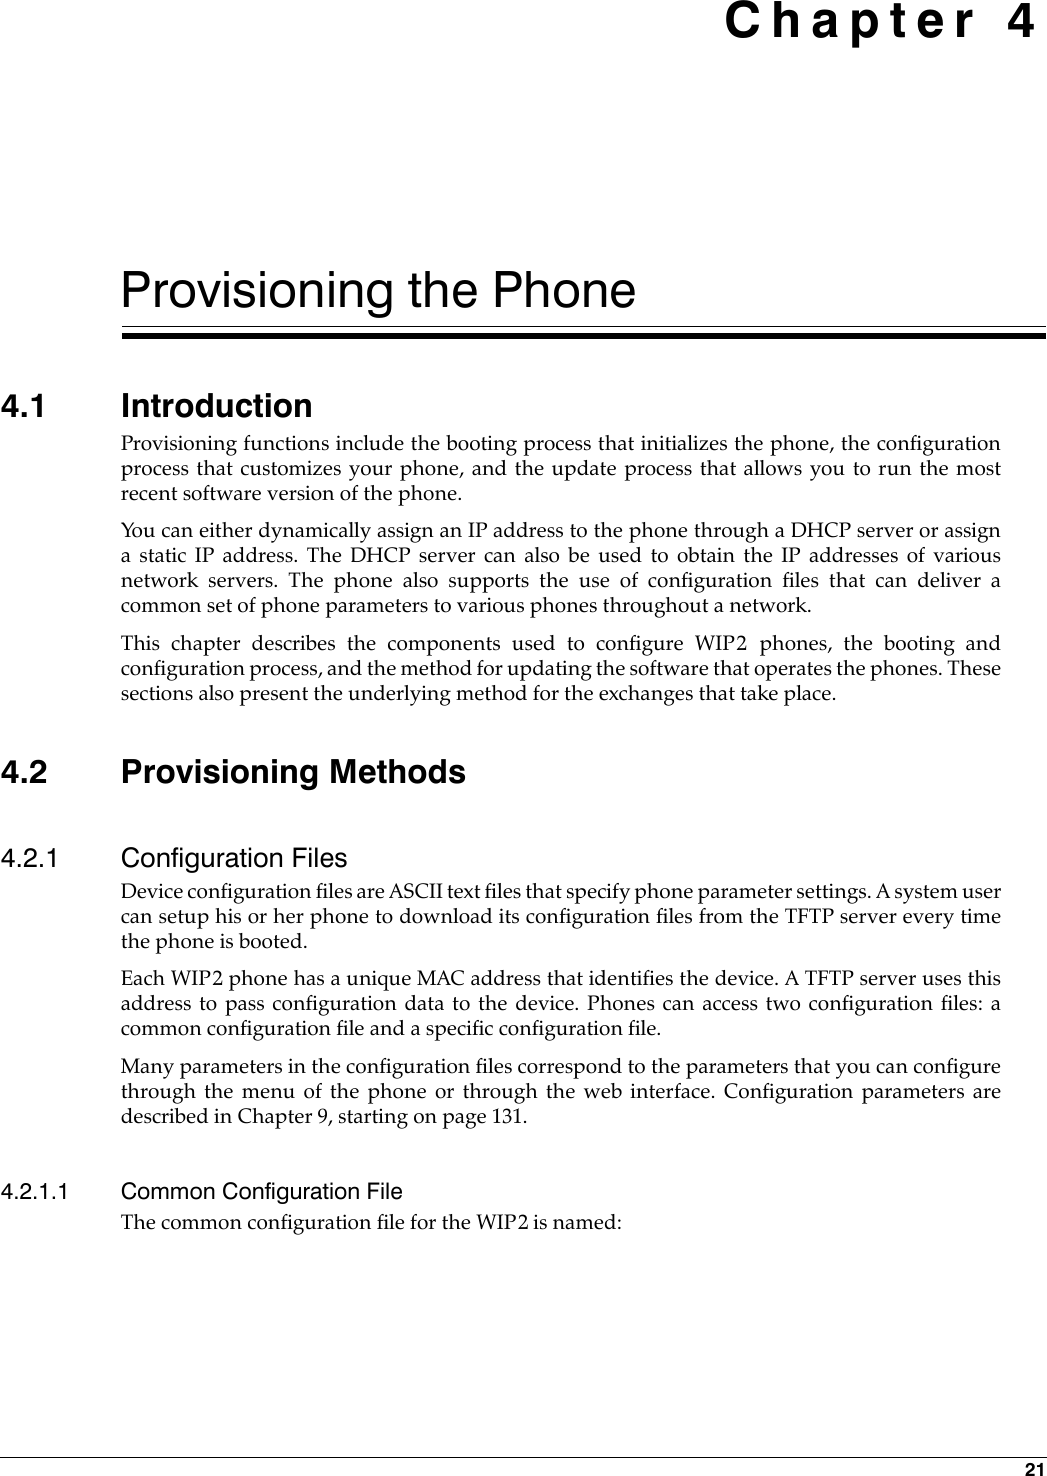 21 Chapter 4Provisioning the Phone4.1 IntroductionProvisioning functions include the booting process that initializes the phone, the configurationprocess that customizes your phone, and the update process that allows you to run the mostrecent software version of the phone.You can either dynamically assign an IP address to the phone through a DHCP server or assigna static IP address. The DHCP server can also be used to obtain the IP addresses of variousnetwork servers. The phone also supports the use of configuration files that can deliver acommon set of phone parameters to various phones throughout a network.This chapter describes the components used to configure WIP2 phones, the booting andconfiguration process, and the method for updating the software that operates the phones. Thesesections also present the underlying method for the exchanges that take place.4.2 Provisioning Methods4.2.1 Configuration FilesDevice configuration files are ASCII text files that specify phone parameter settings. A system usercan setup his or her phone to download its configuration files from the TFTP server every timethe phone is booted. Each WIP2 phone has a unique MAC address that identifies the device. A TFTP server uses thisaddress to pass configuration data to the device. Phones can access two configuration files: acommon configuration file and a specific configuration file.Many parameters in the configuration files correspond to the parameters that you can configurethrough the menu of the phone or through the web interface. Configuration parameters aredescribed in Chapter 9, starting on page 131.4.2.1.1 Common Configuration FileThe common configuration file for the WIP2 is named: